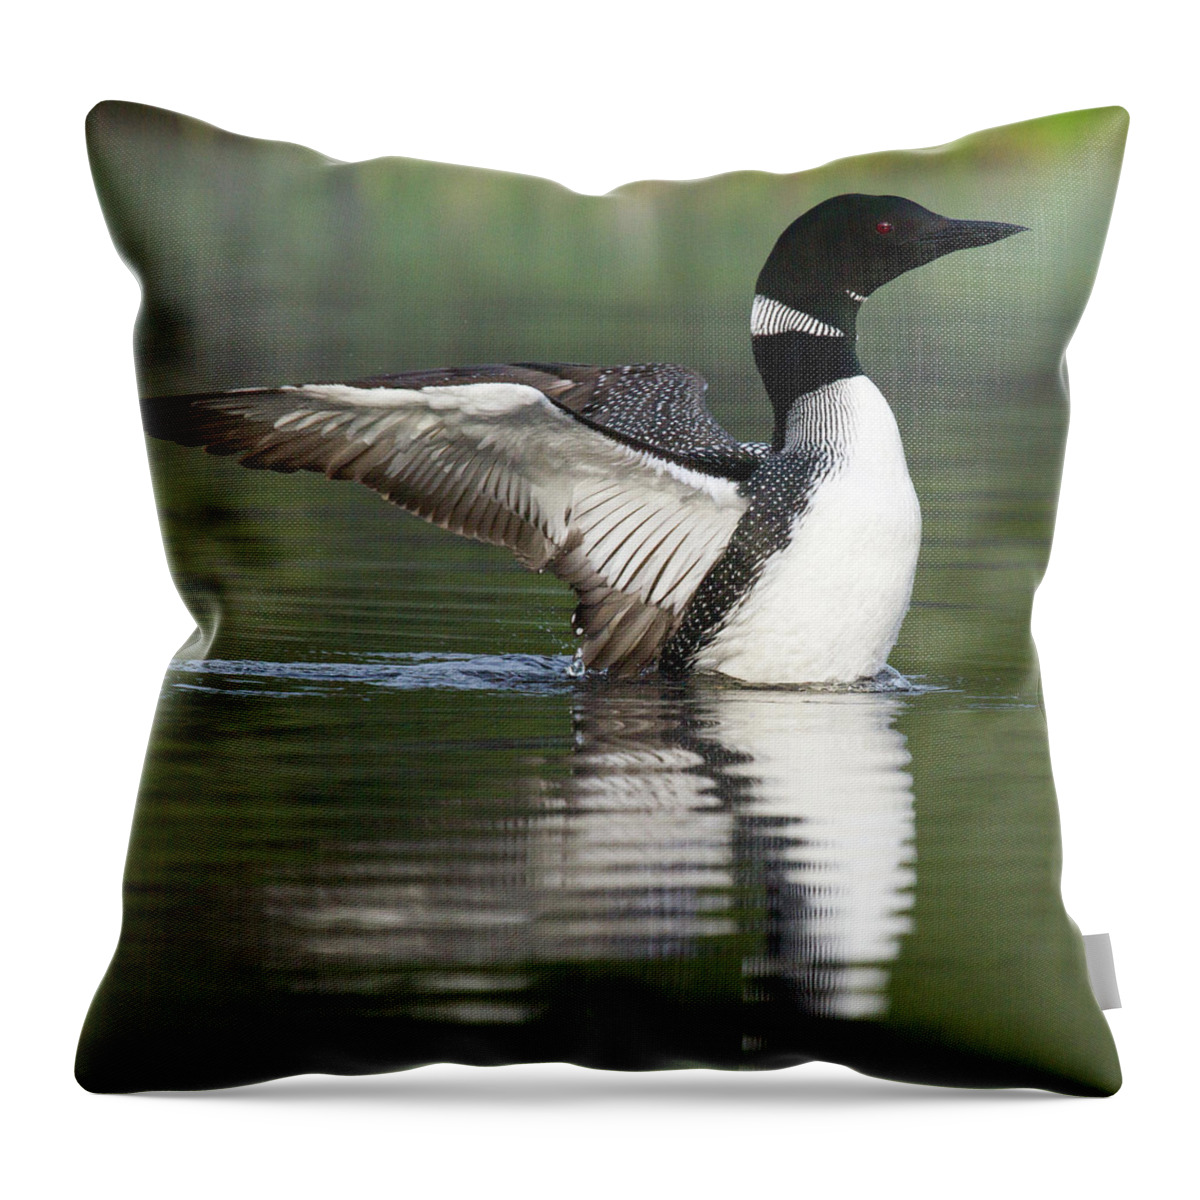 Bird Throw Pillow featuring the photograph Stretching My Wings by Darryl Hendricks